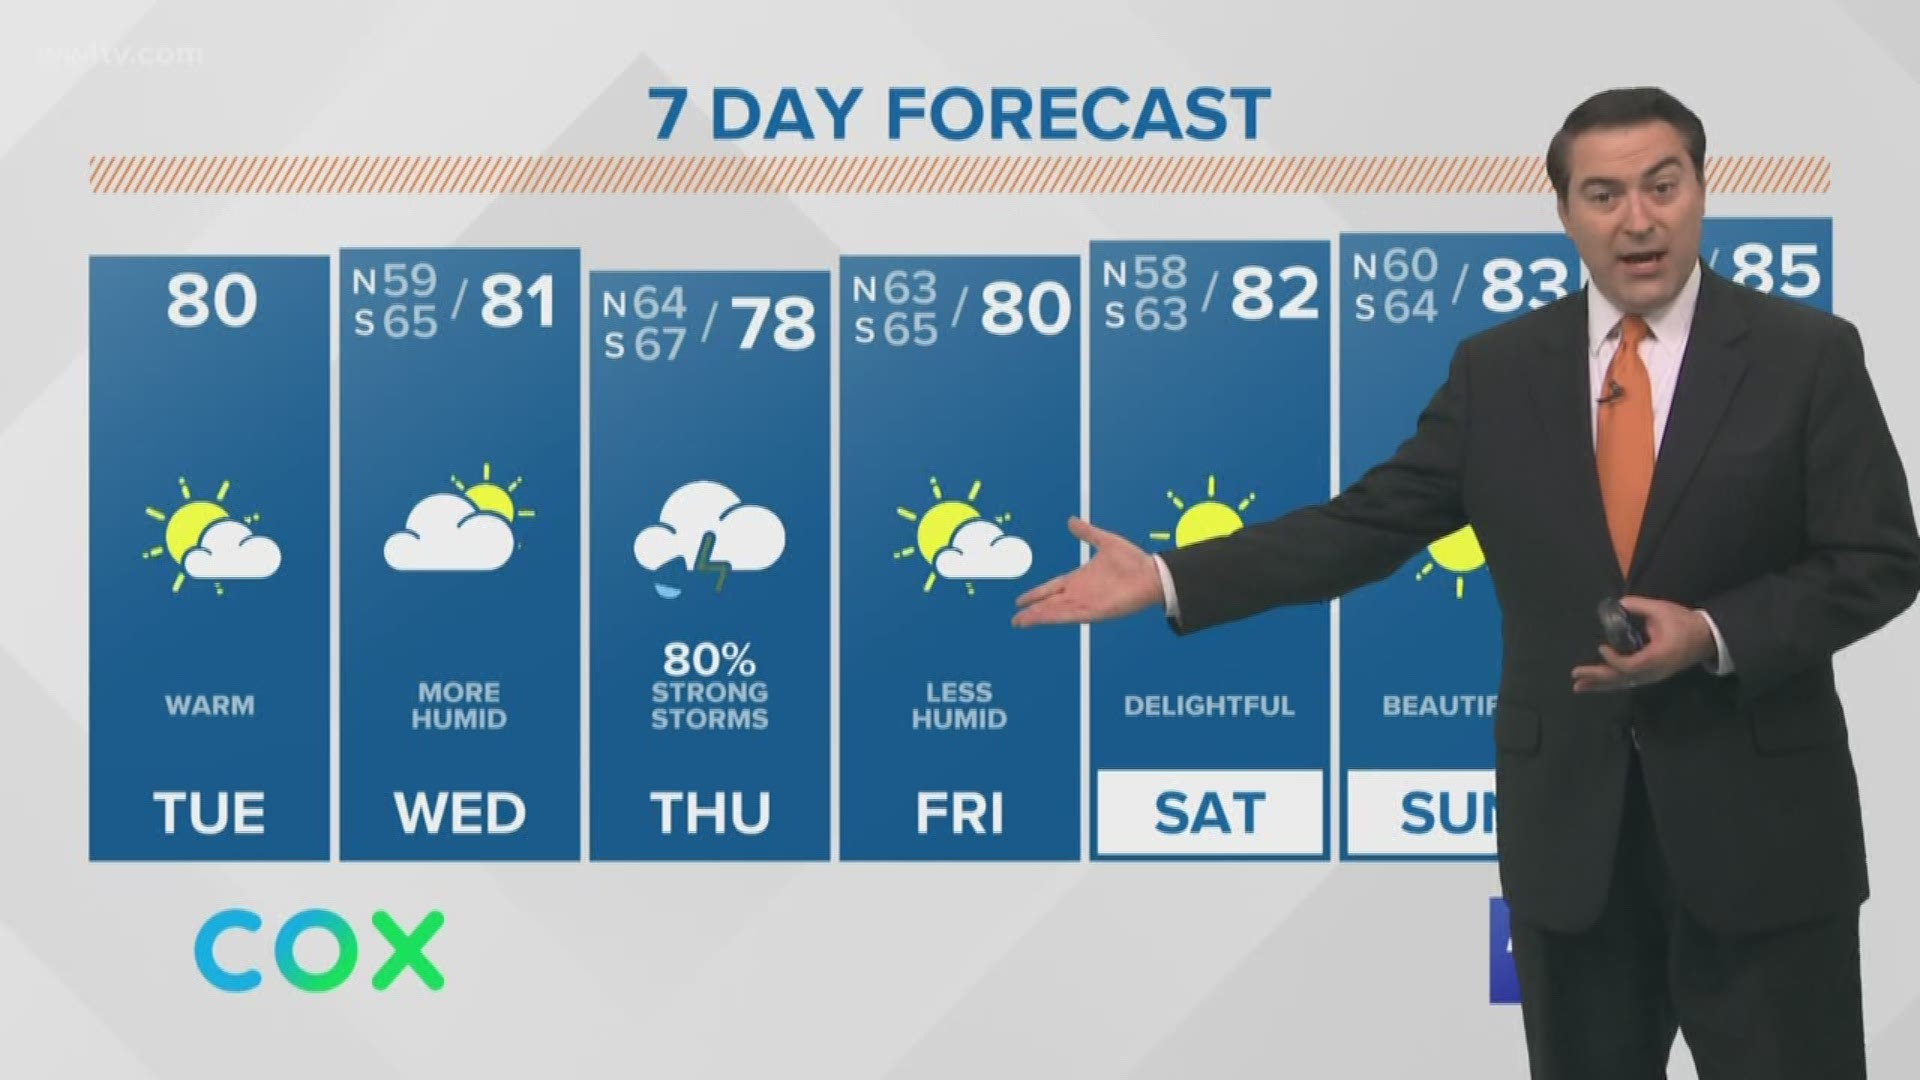 Meteorologist Dave Nussbaum says it will be a warm day with a sun/cloud mix in New Orleans. Then strong storms with heavy rain arrive on Thursday as a cold front moves through town.